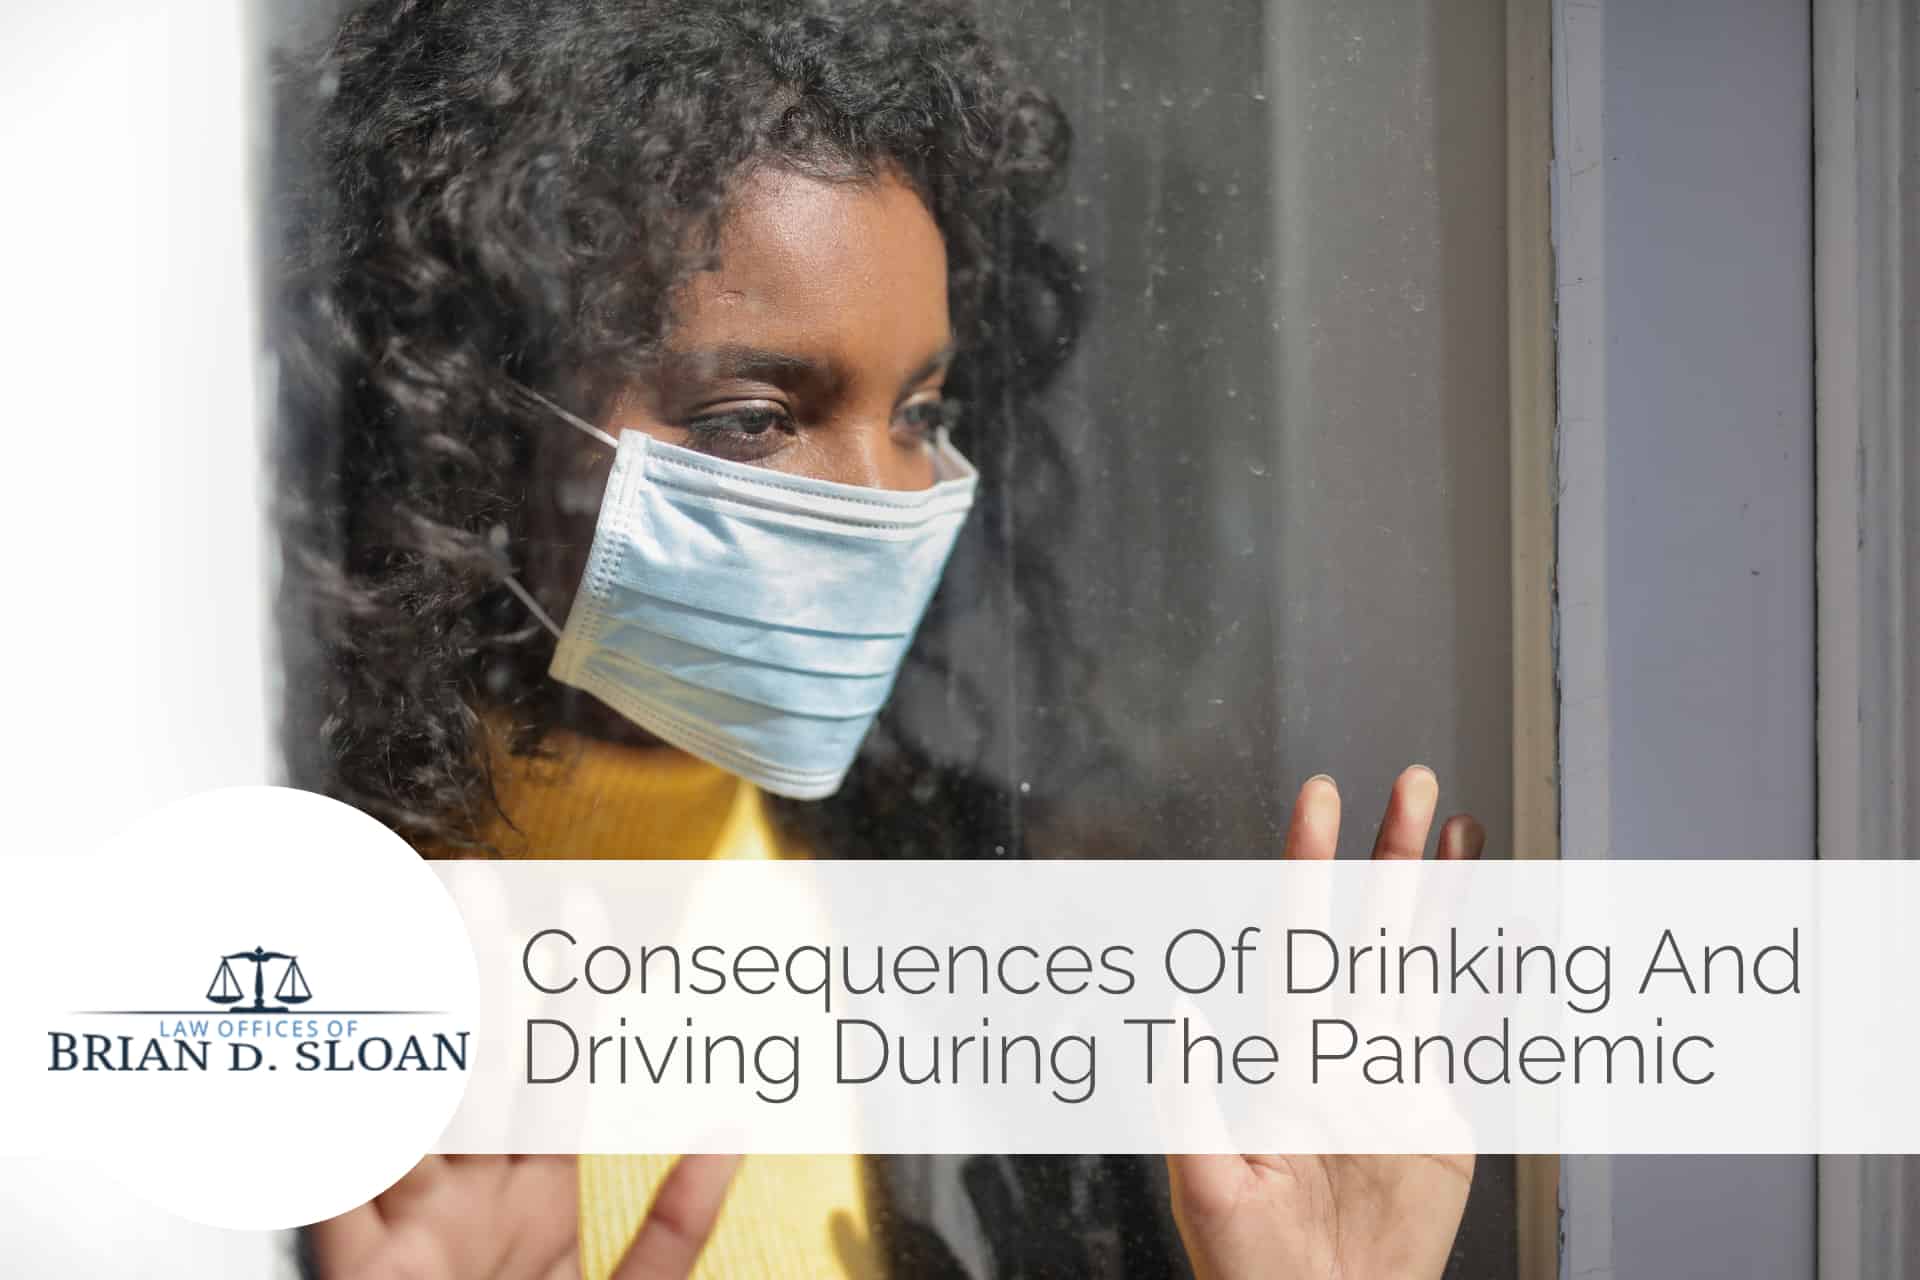 drinking and driving drunk driving pandemic consequences